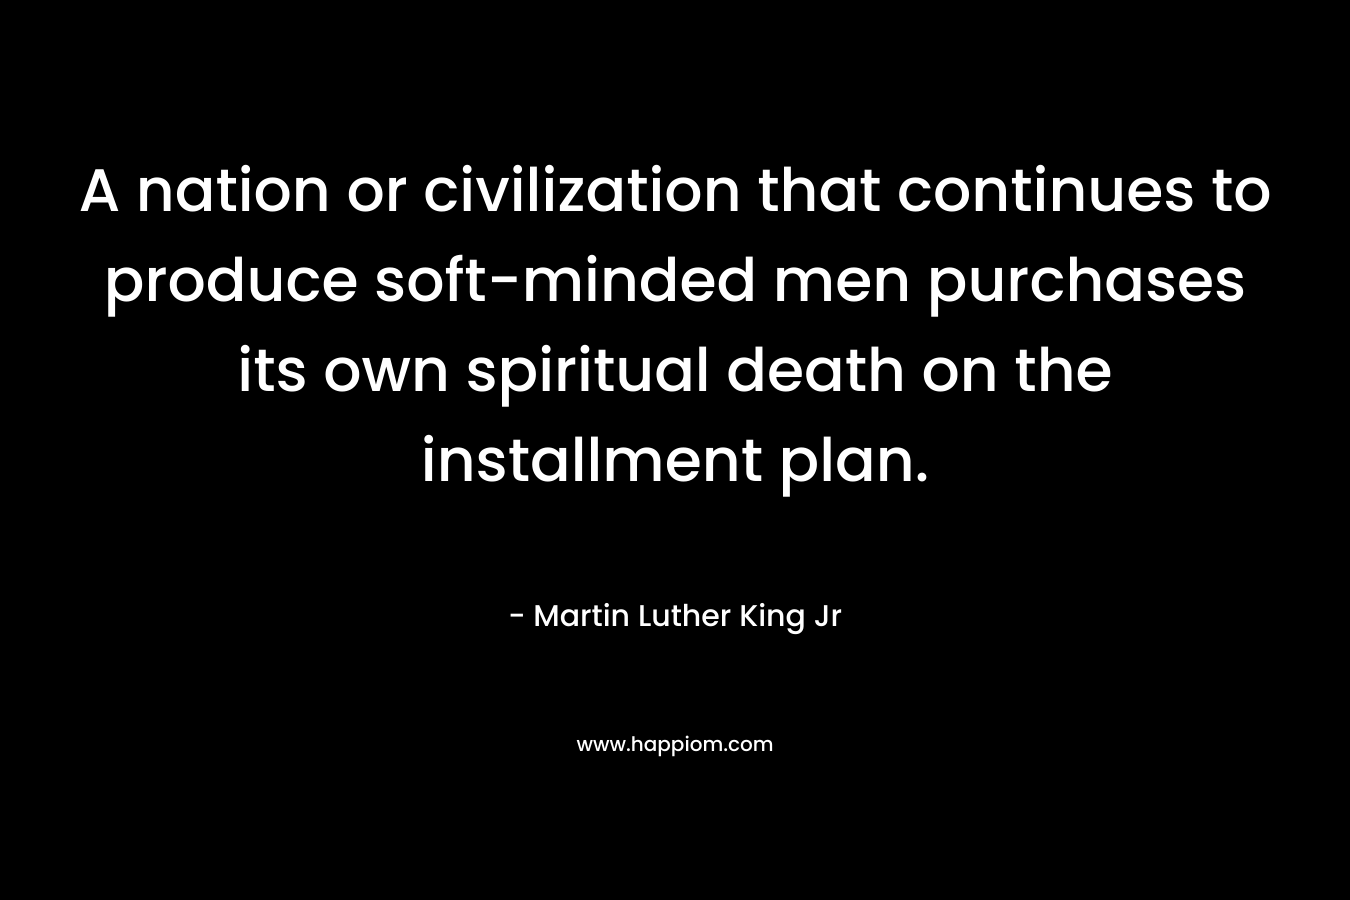 A nation or civilization that continues to produce soft-minded men purchases its own spiritual death on the installment plan.